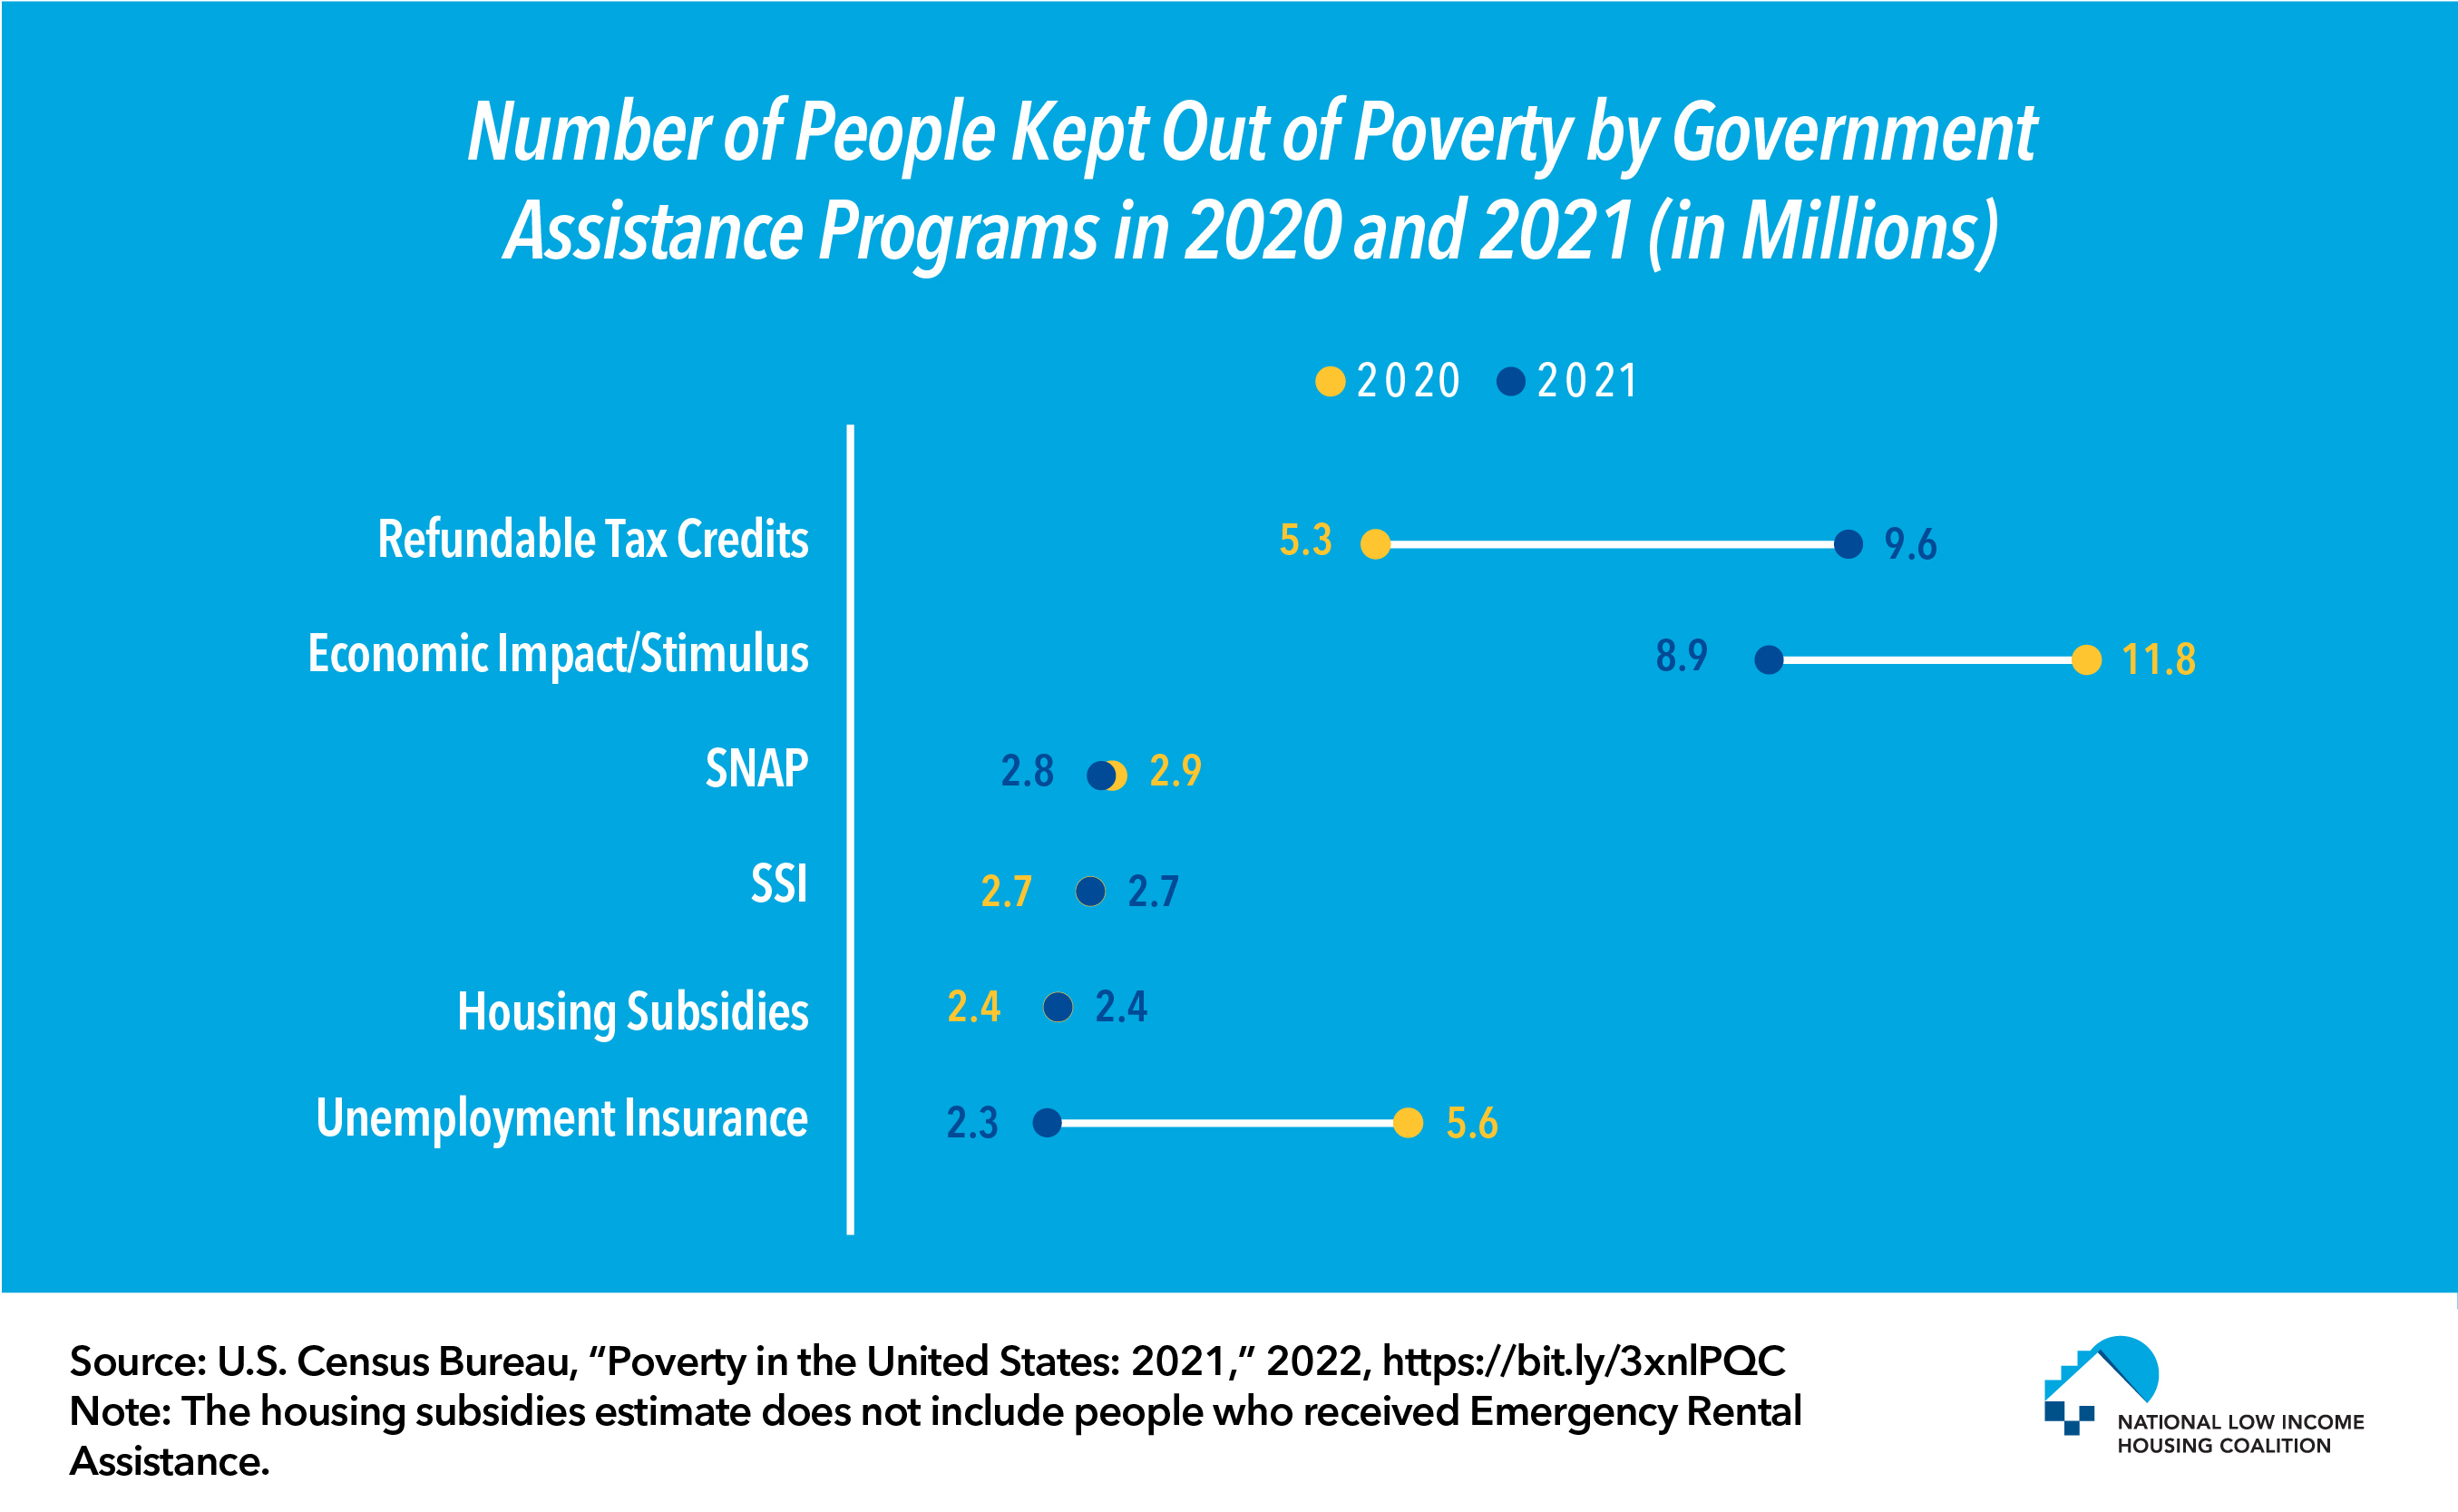 Refundable Tax Credits Kept 9.6 Million People Out of Poverty in 2021